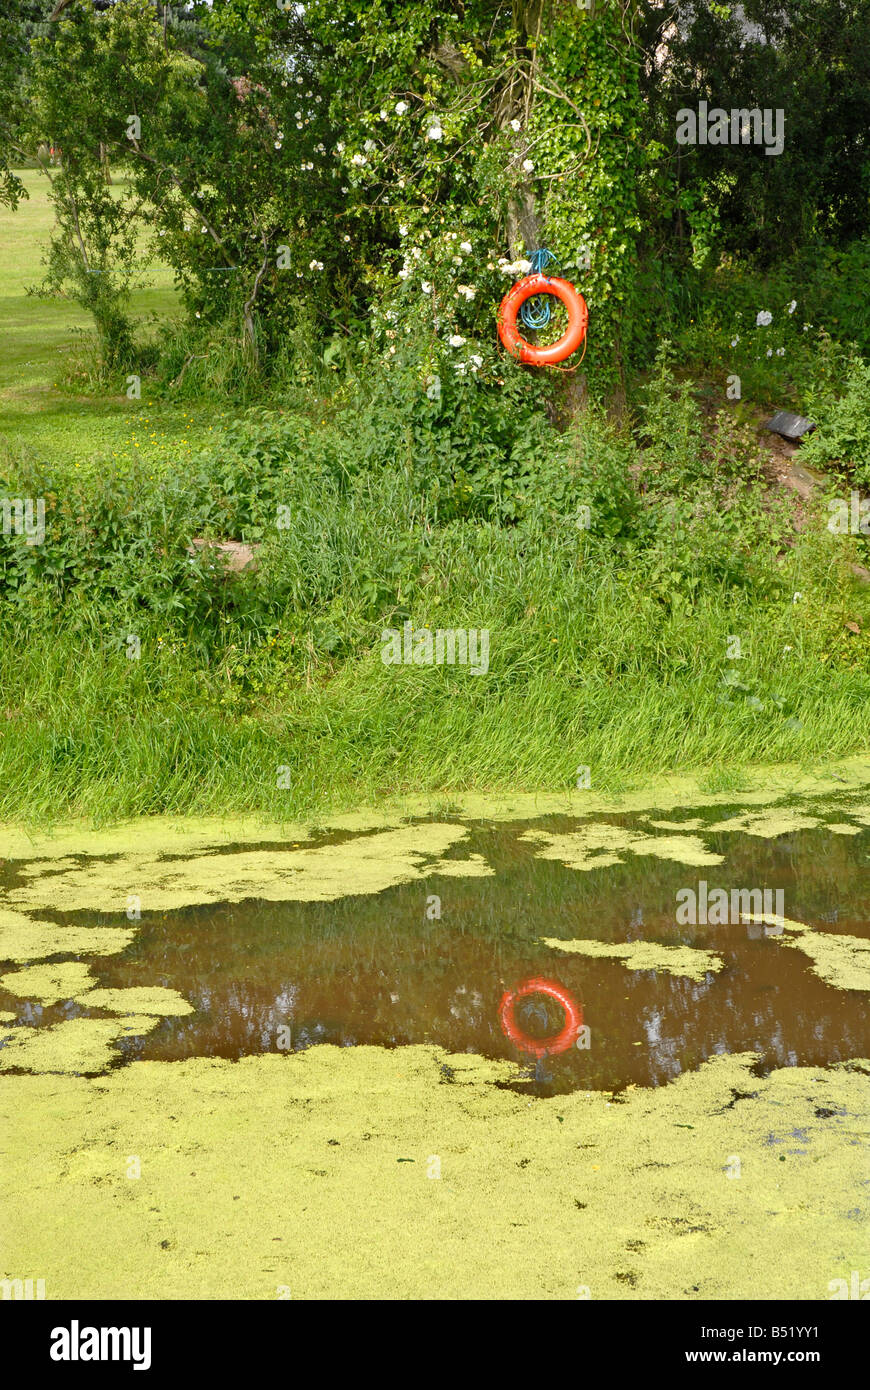 Reflection of red/orange life buoy in weed-covered pond Stock Photo